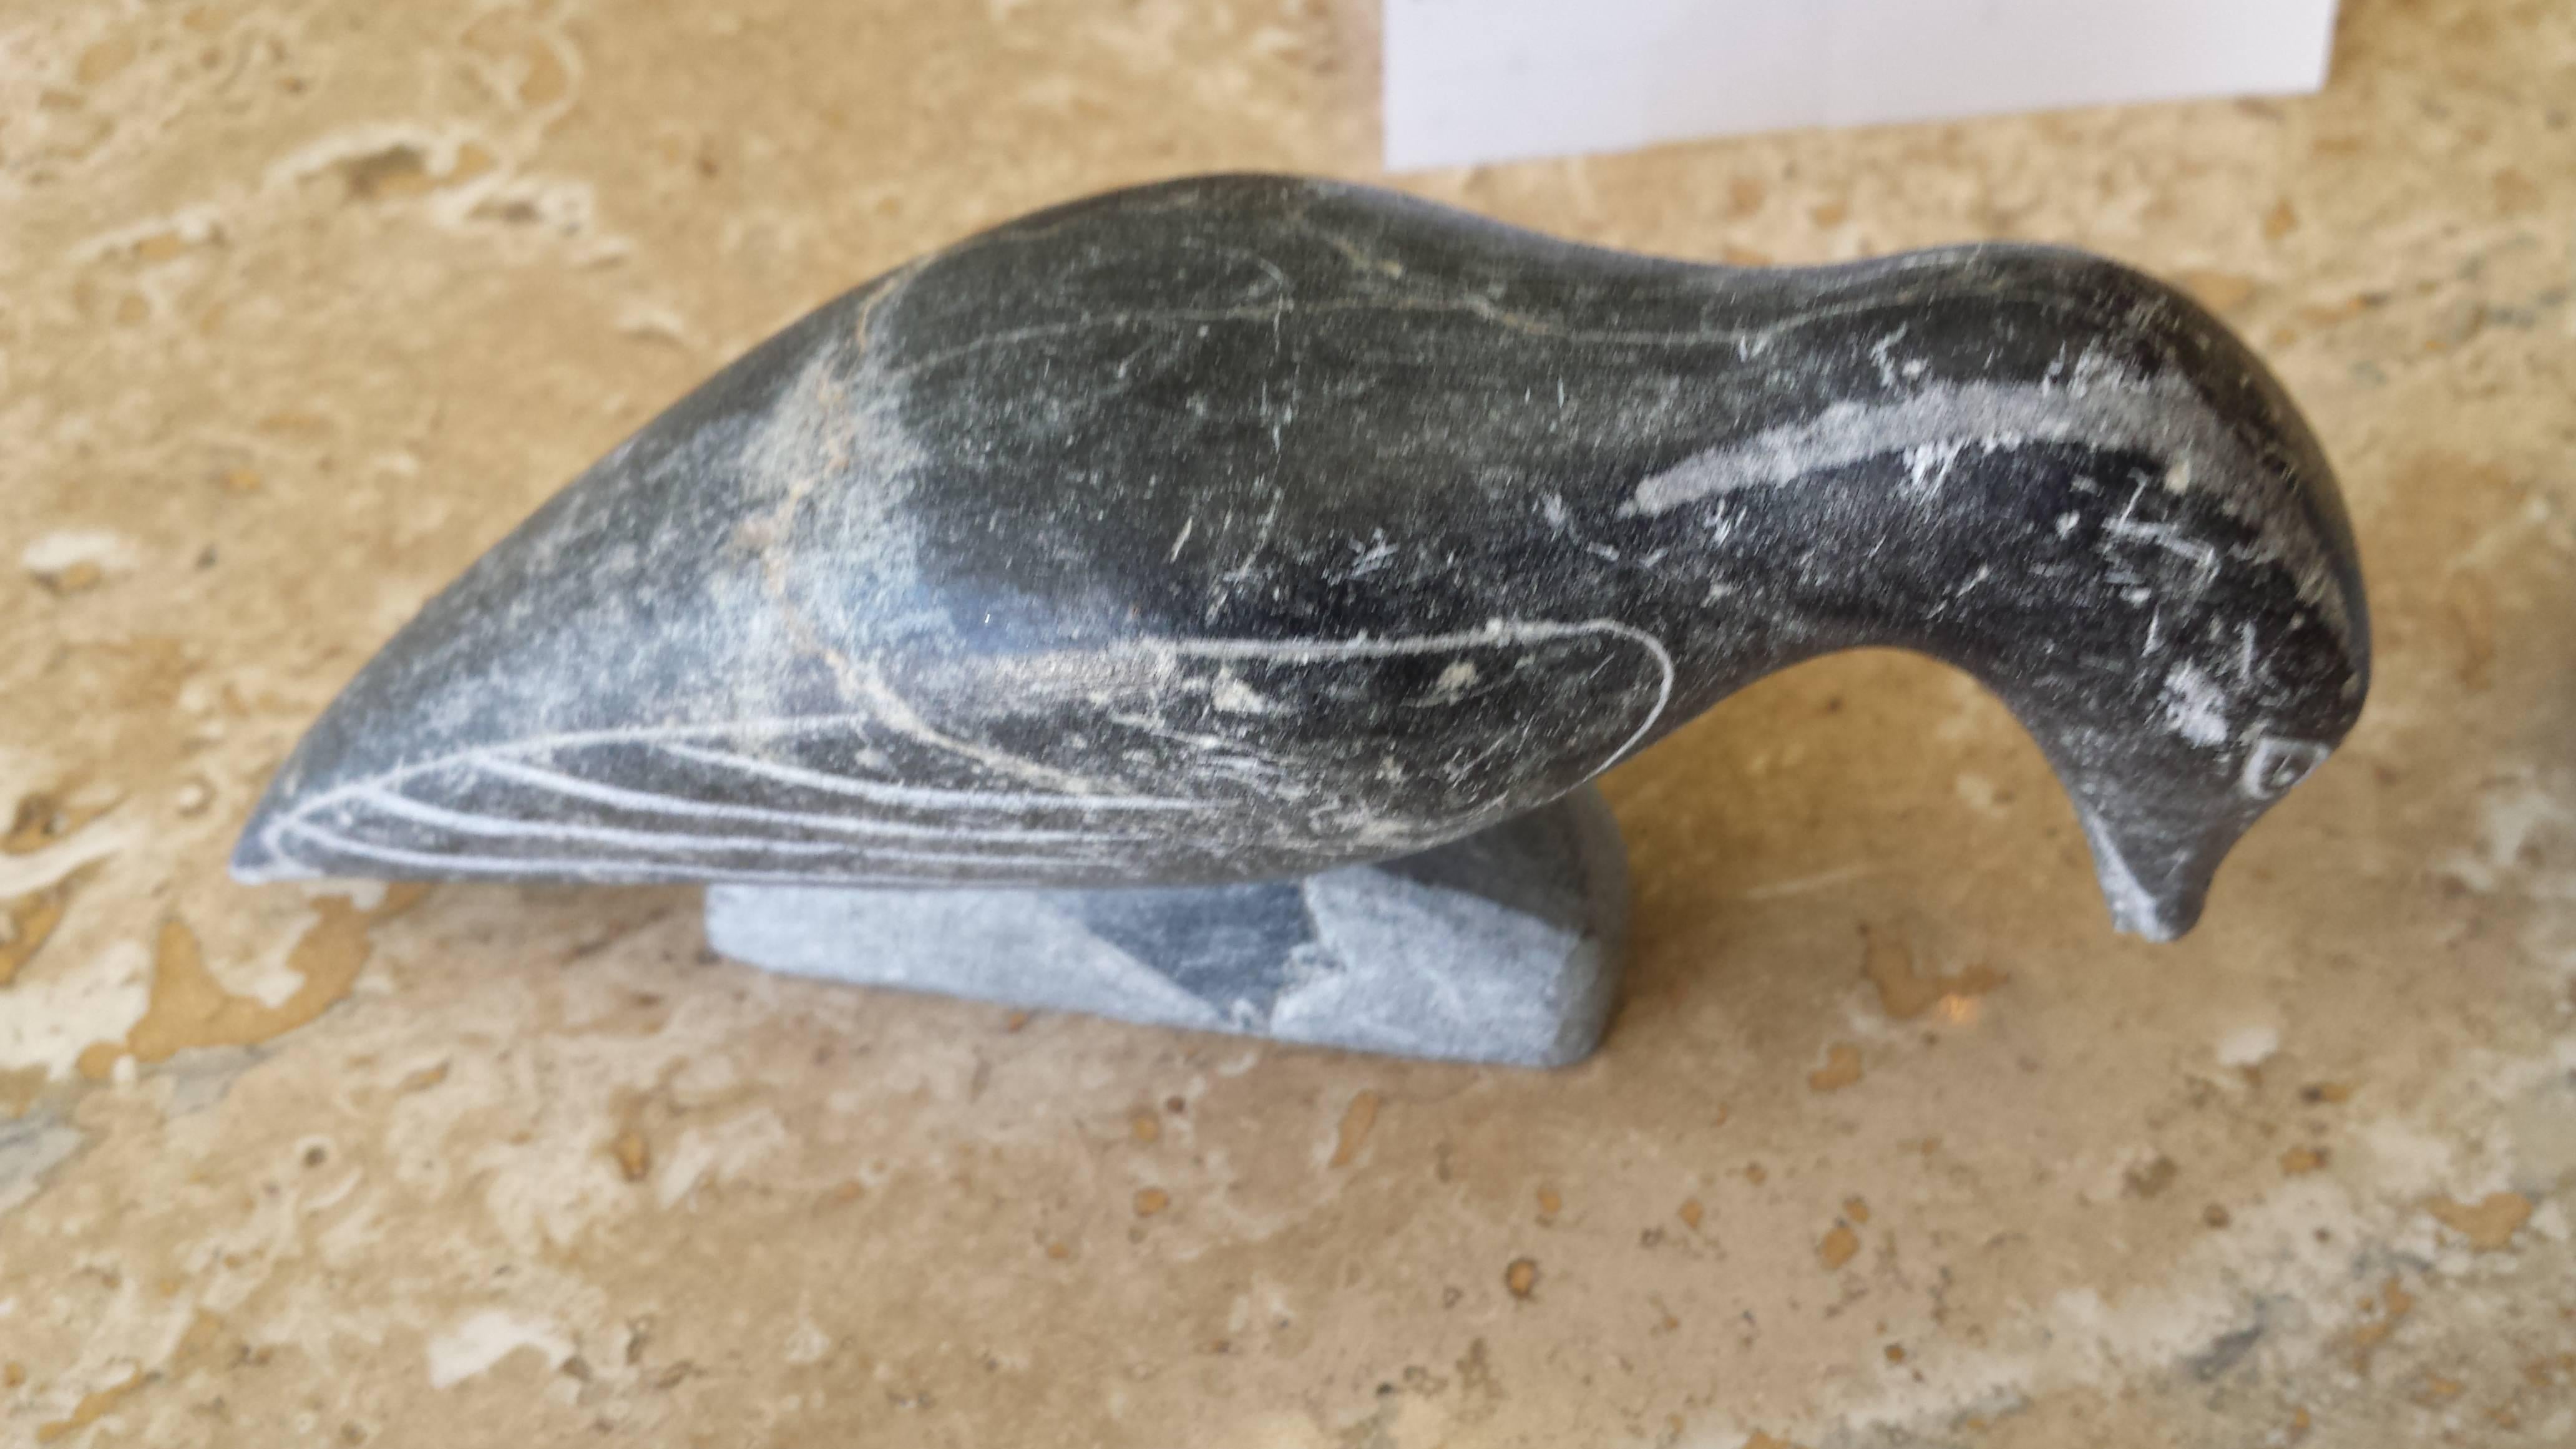 Pair of soapstone Inuit birds signed in Syllabics and E numbered for Carver ID. Both are carved in black colored soapstone, the bird with his beak down measures 5" inches long x 1 1/2" inches deep x 2 1/2" inches high. (Please see